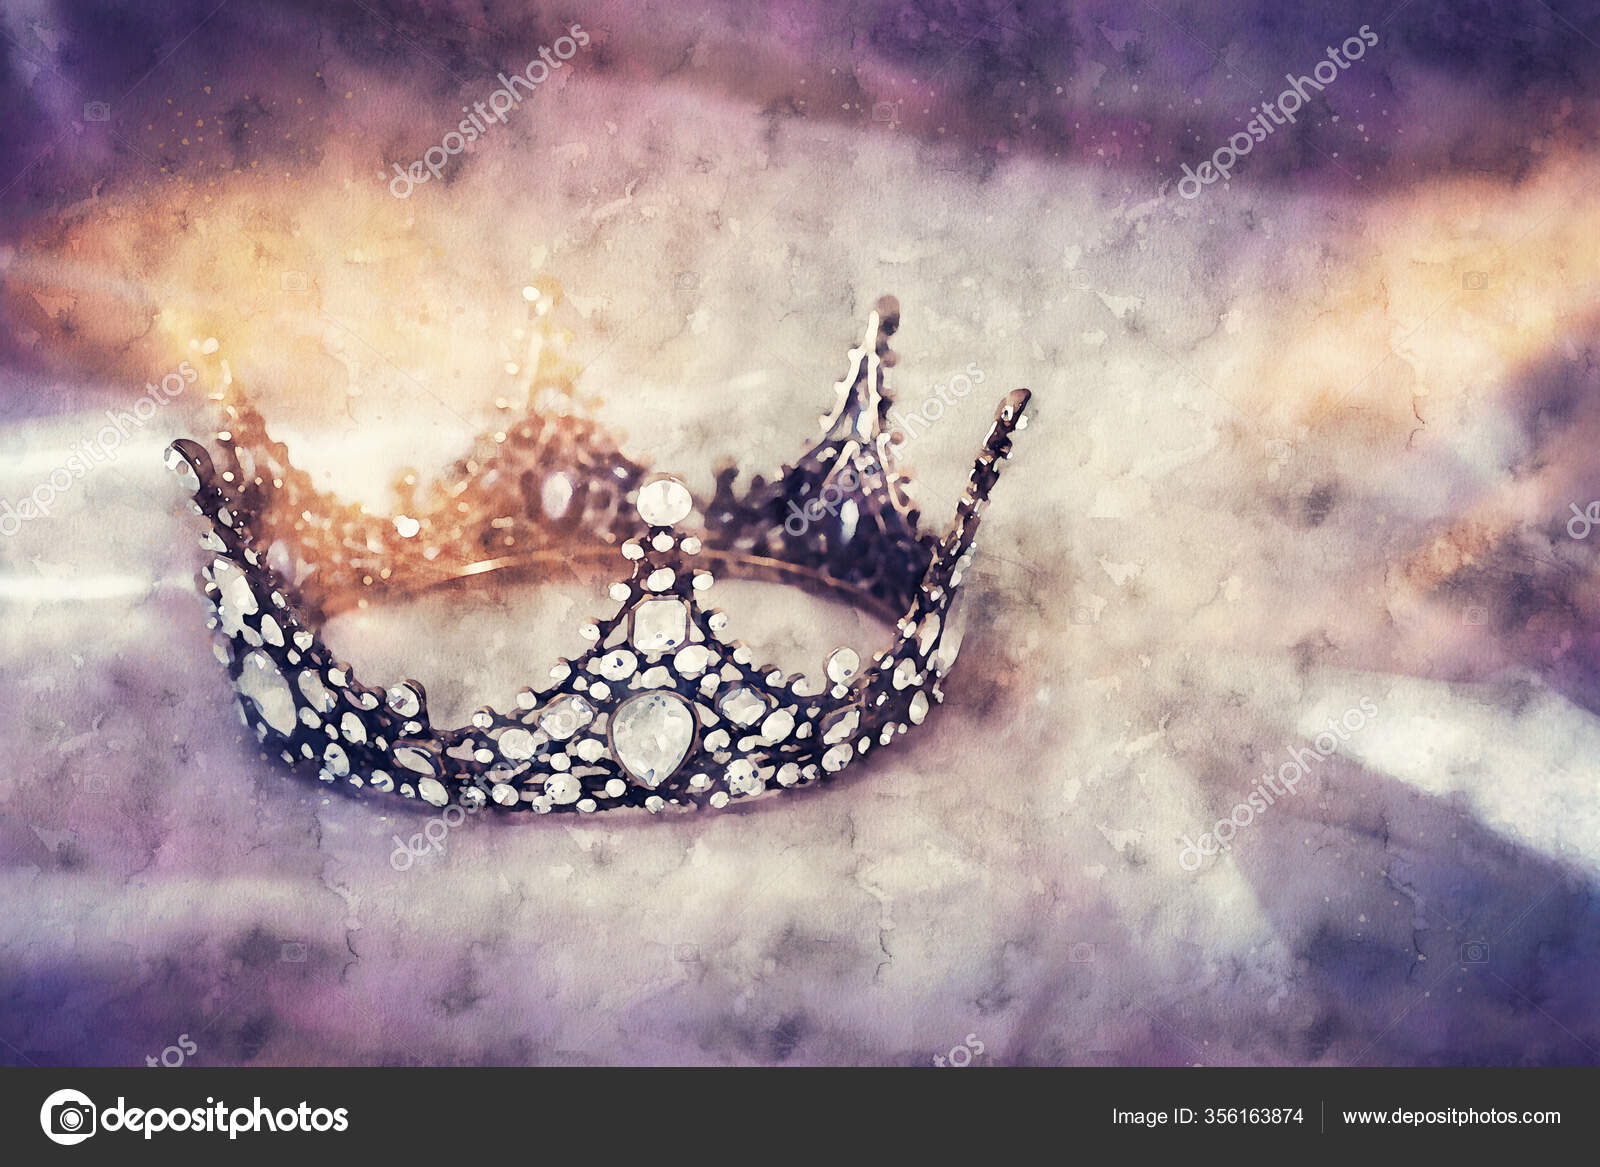 Watercolor Style Abstract Image Beautiful Queen King Crown Fantasy Medieval  Stock Photo by ©tomert 356163874